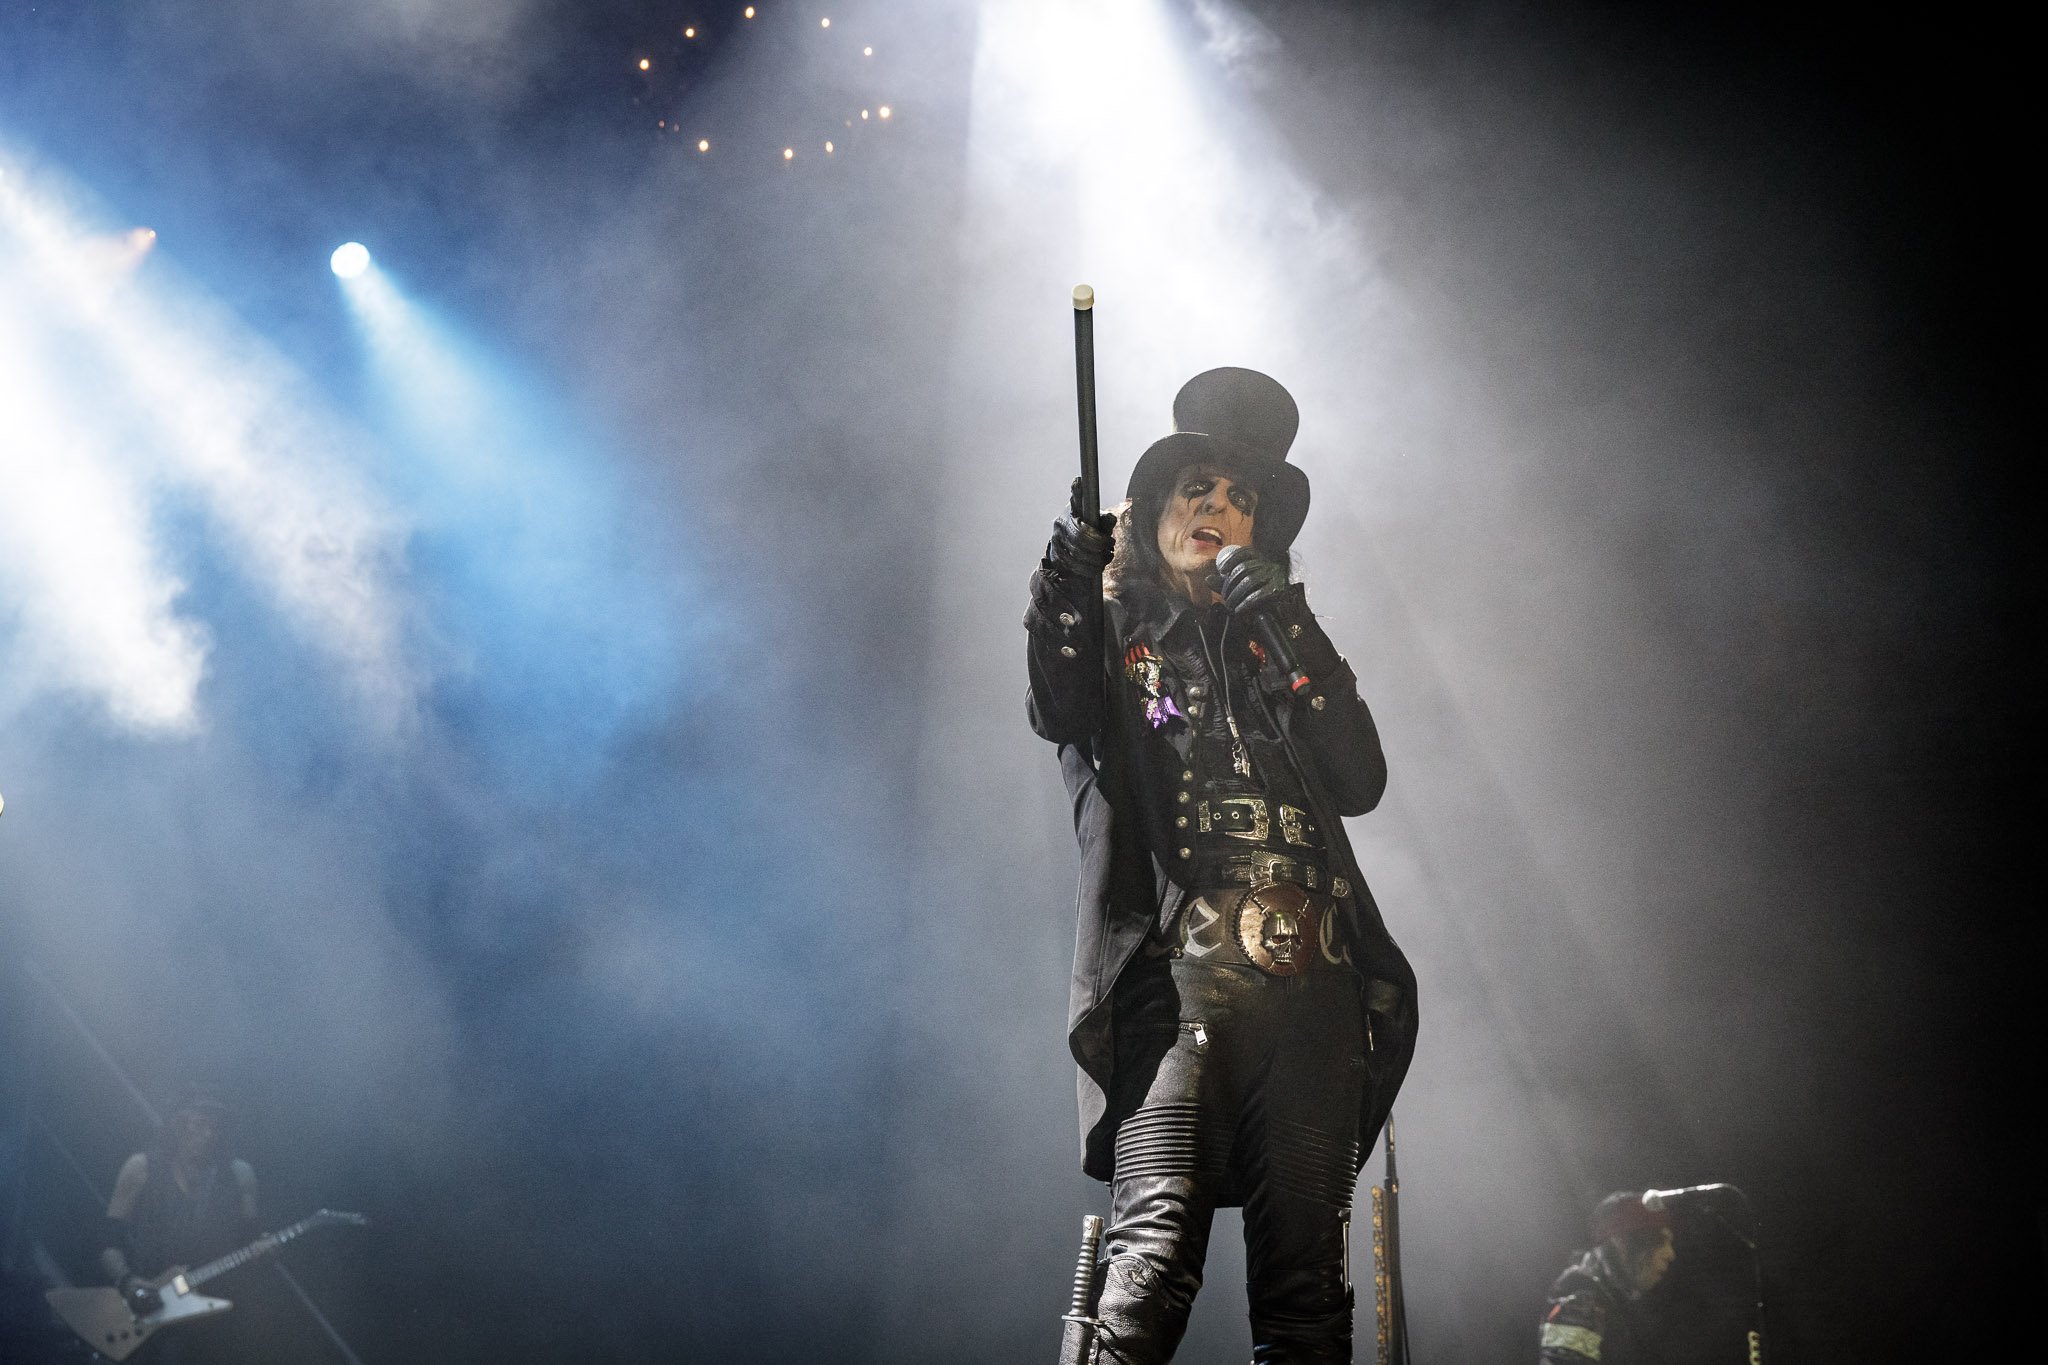 Alice Cooper at the AO Arena in Manchester on May 27th 2022 ©Jo